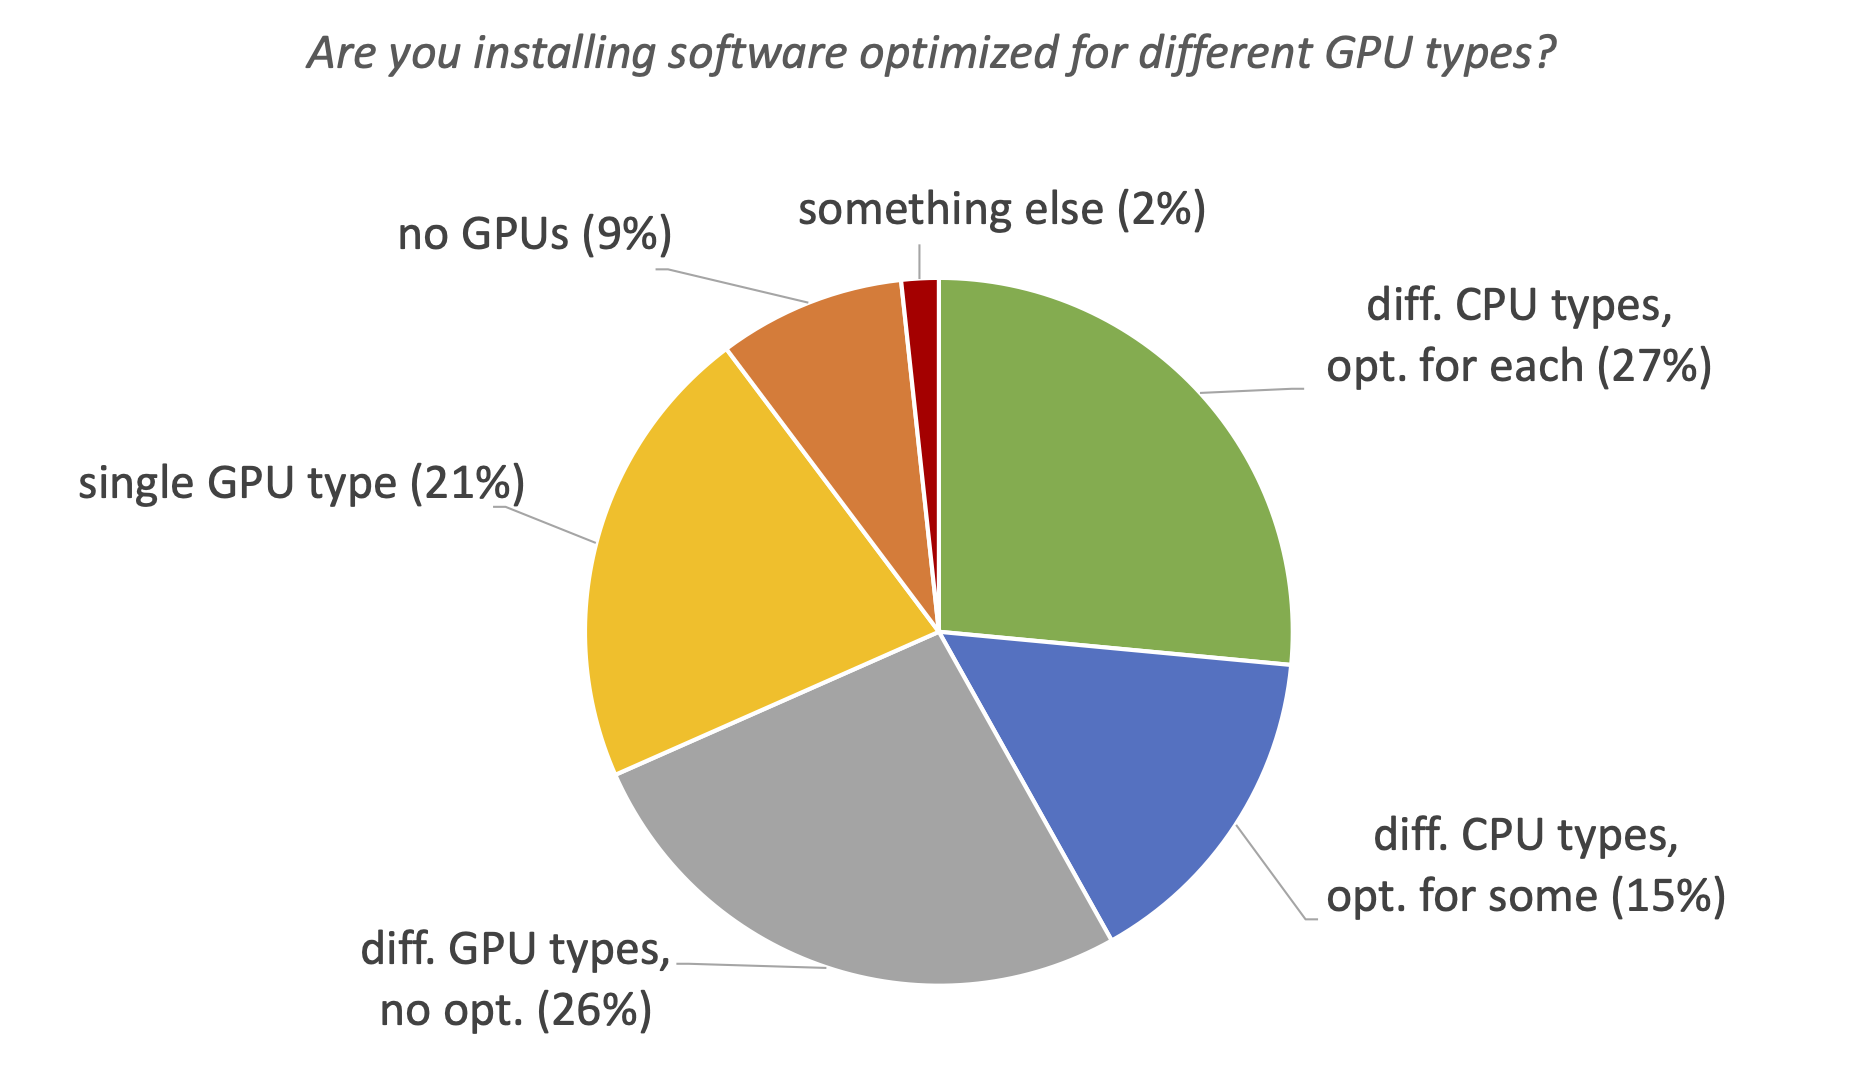 15. Are you installing software optimized for different GPU types?